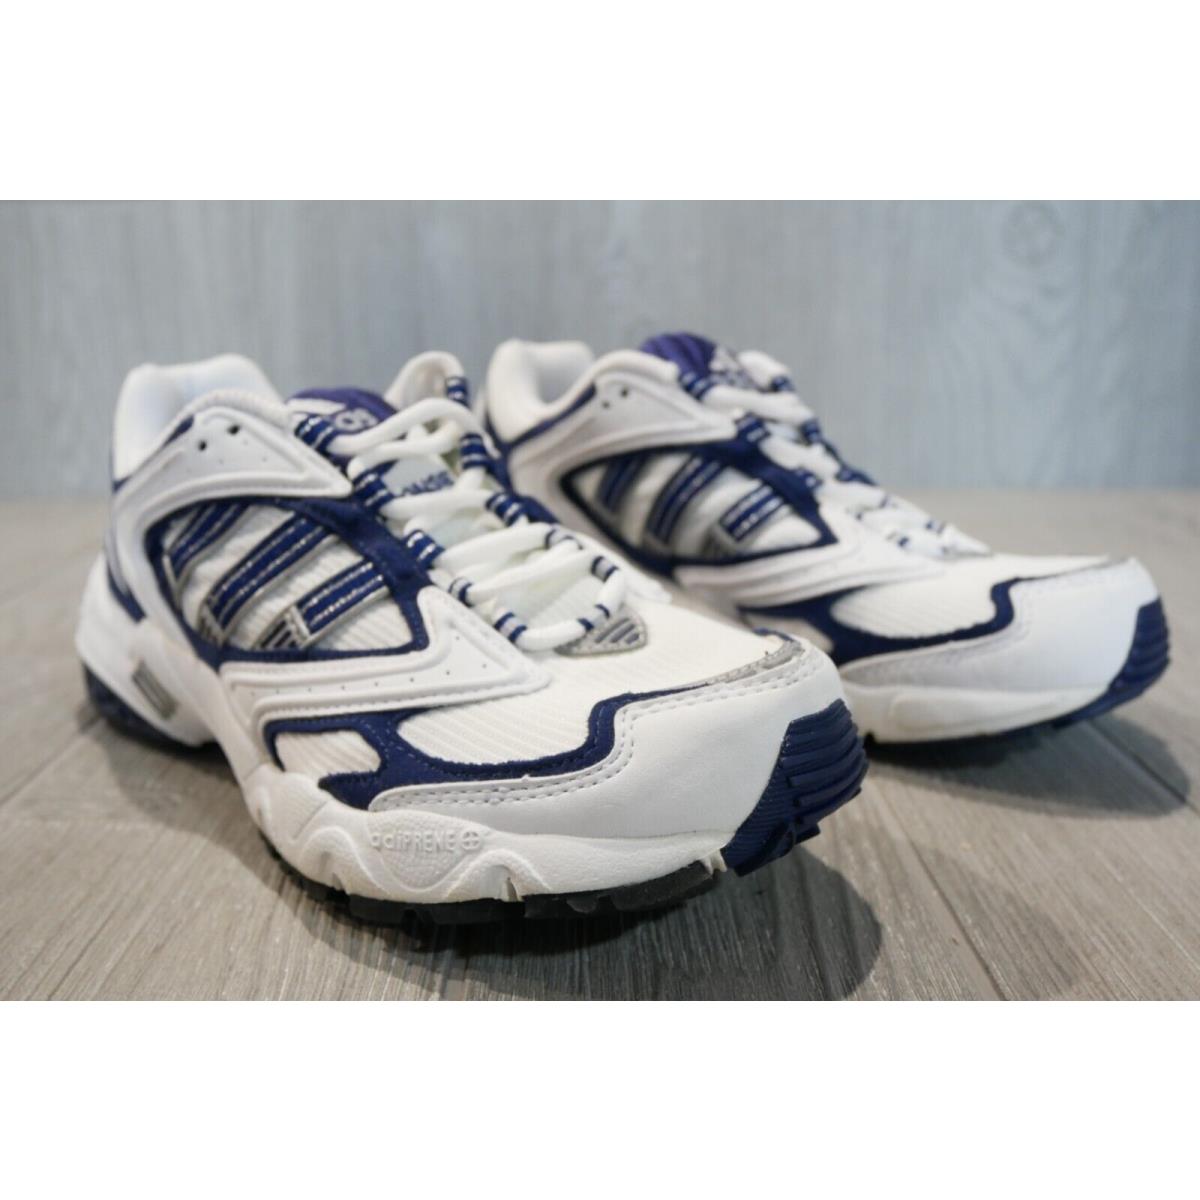 that's all preposition Rather Vintage Adidas Response Running Shoes 1999 Womens Size 6.5 - 9 Oss |  692740736563 - Adidas shoes Response - White | SporTipTop